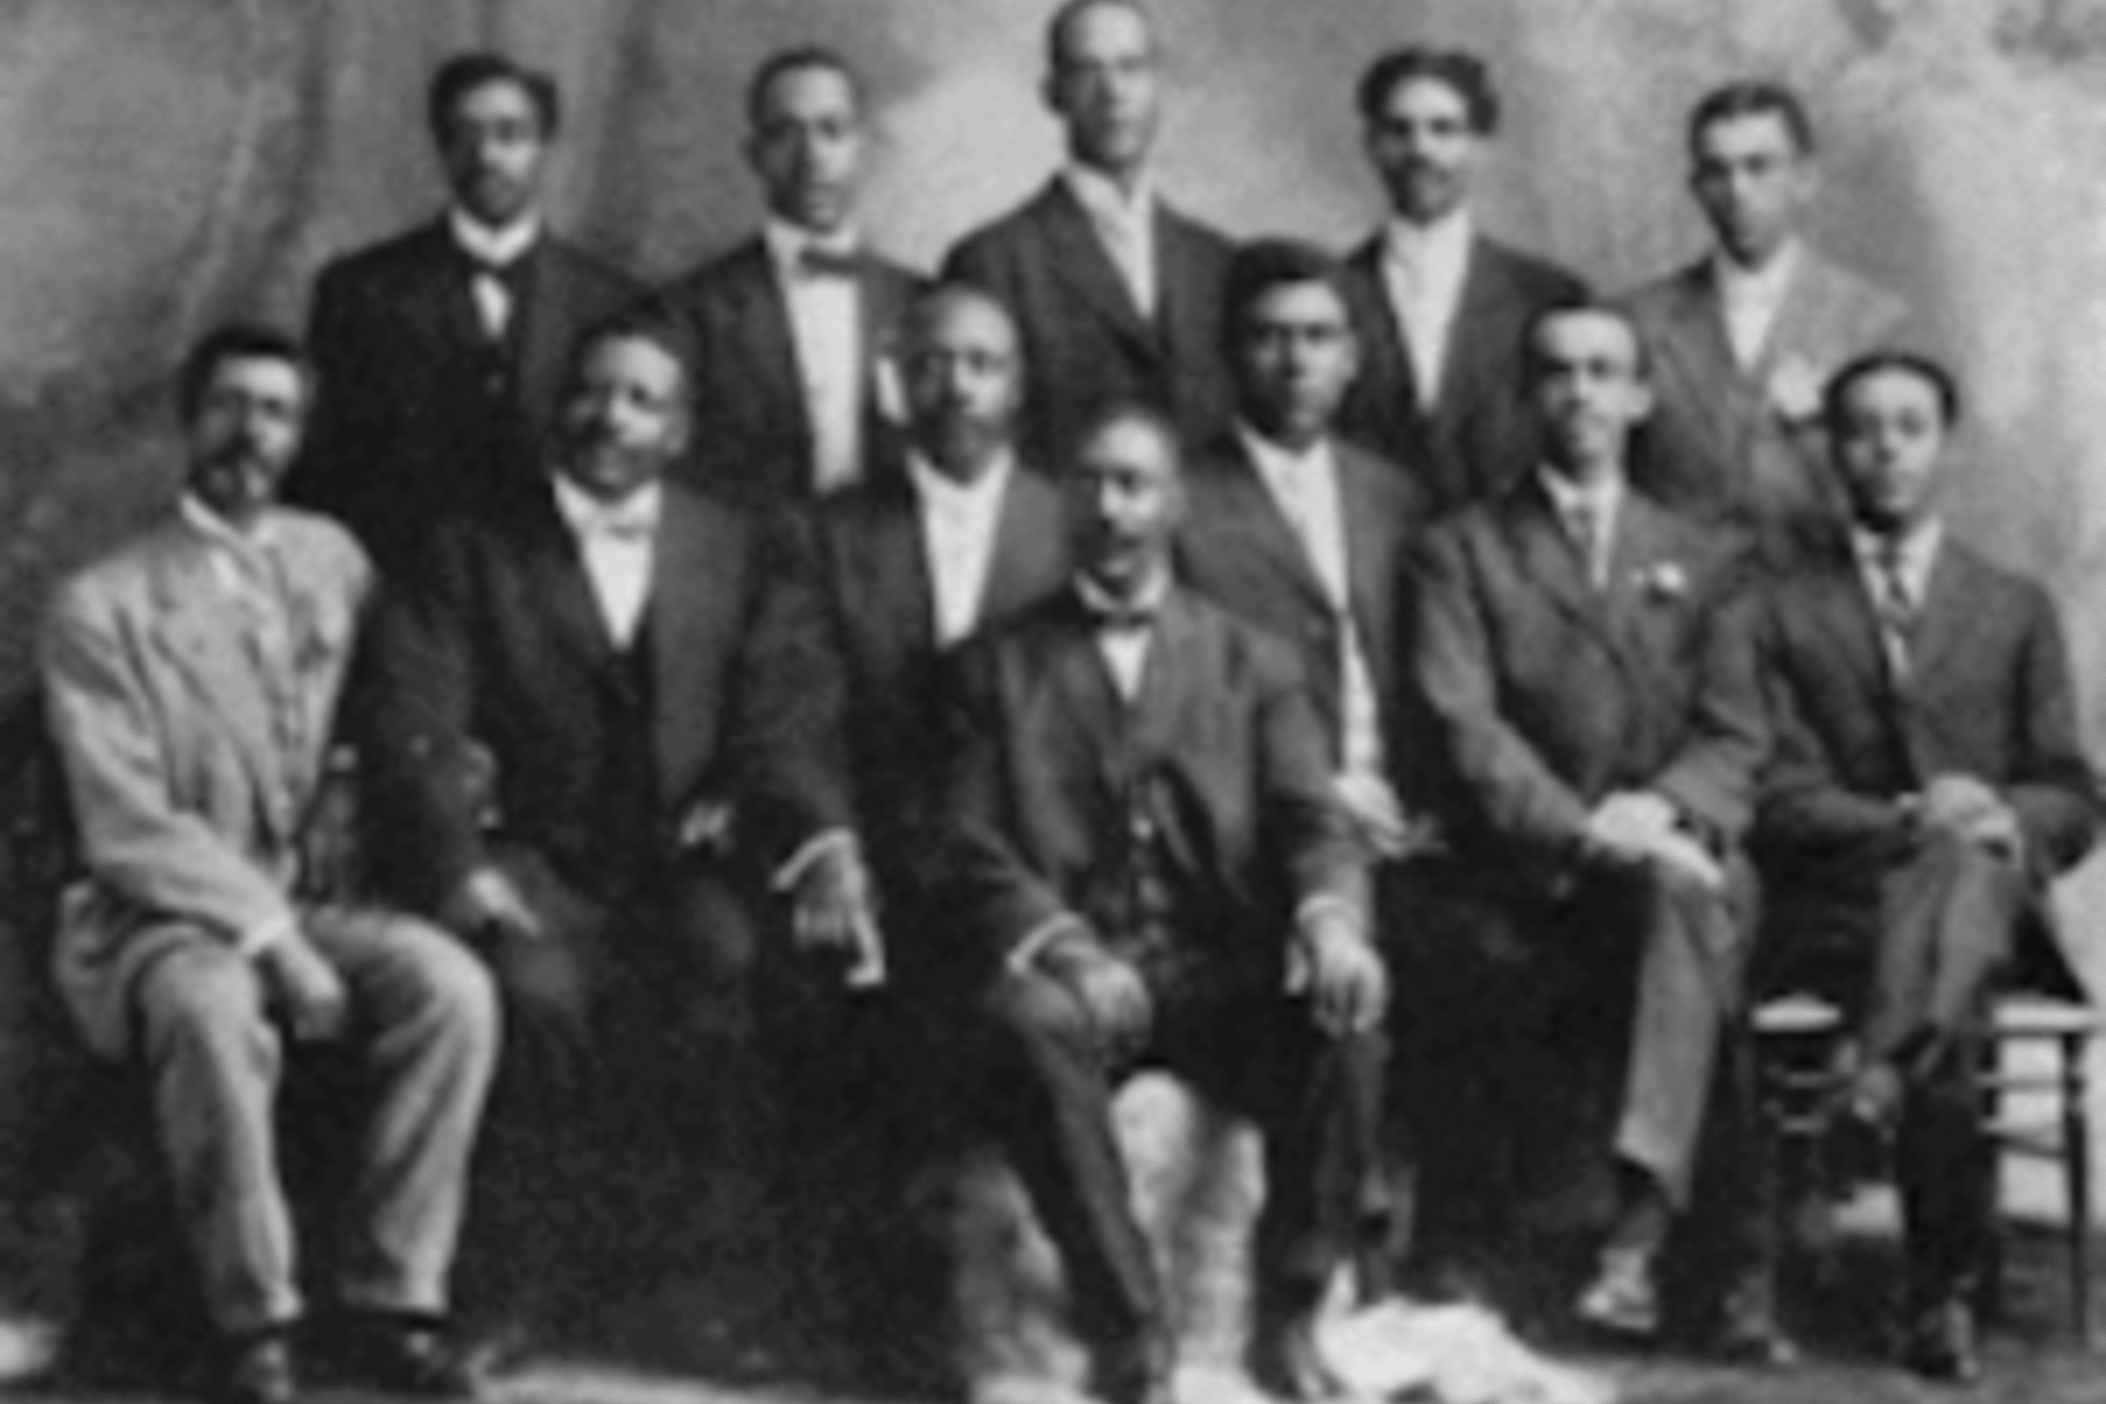 In 1895, National Negro Medical Association (NNMA) was founded. Consisting of three major Black medical professions, they were originally called the National Negro Medical Association of Physicians, Dentists, and Pharmacists.